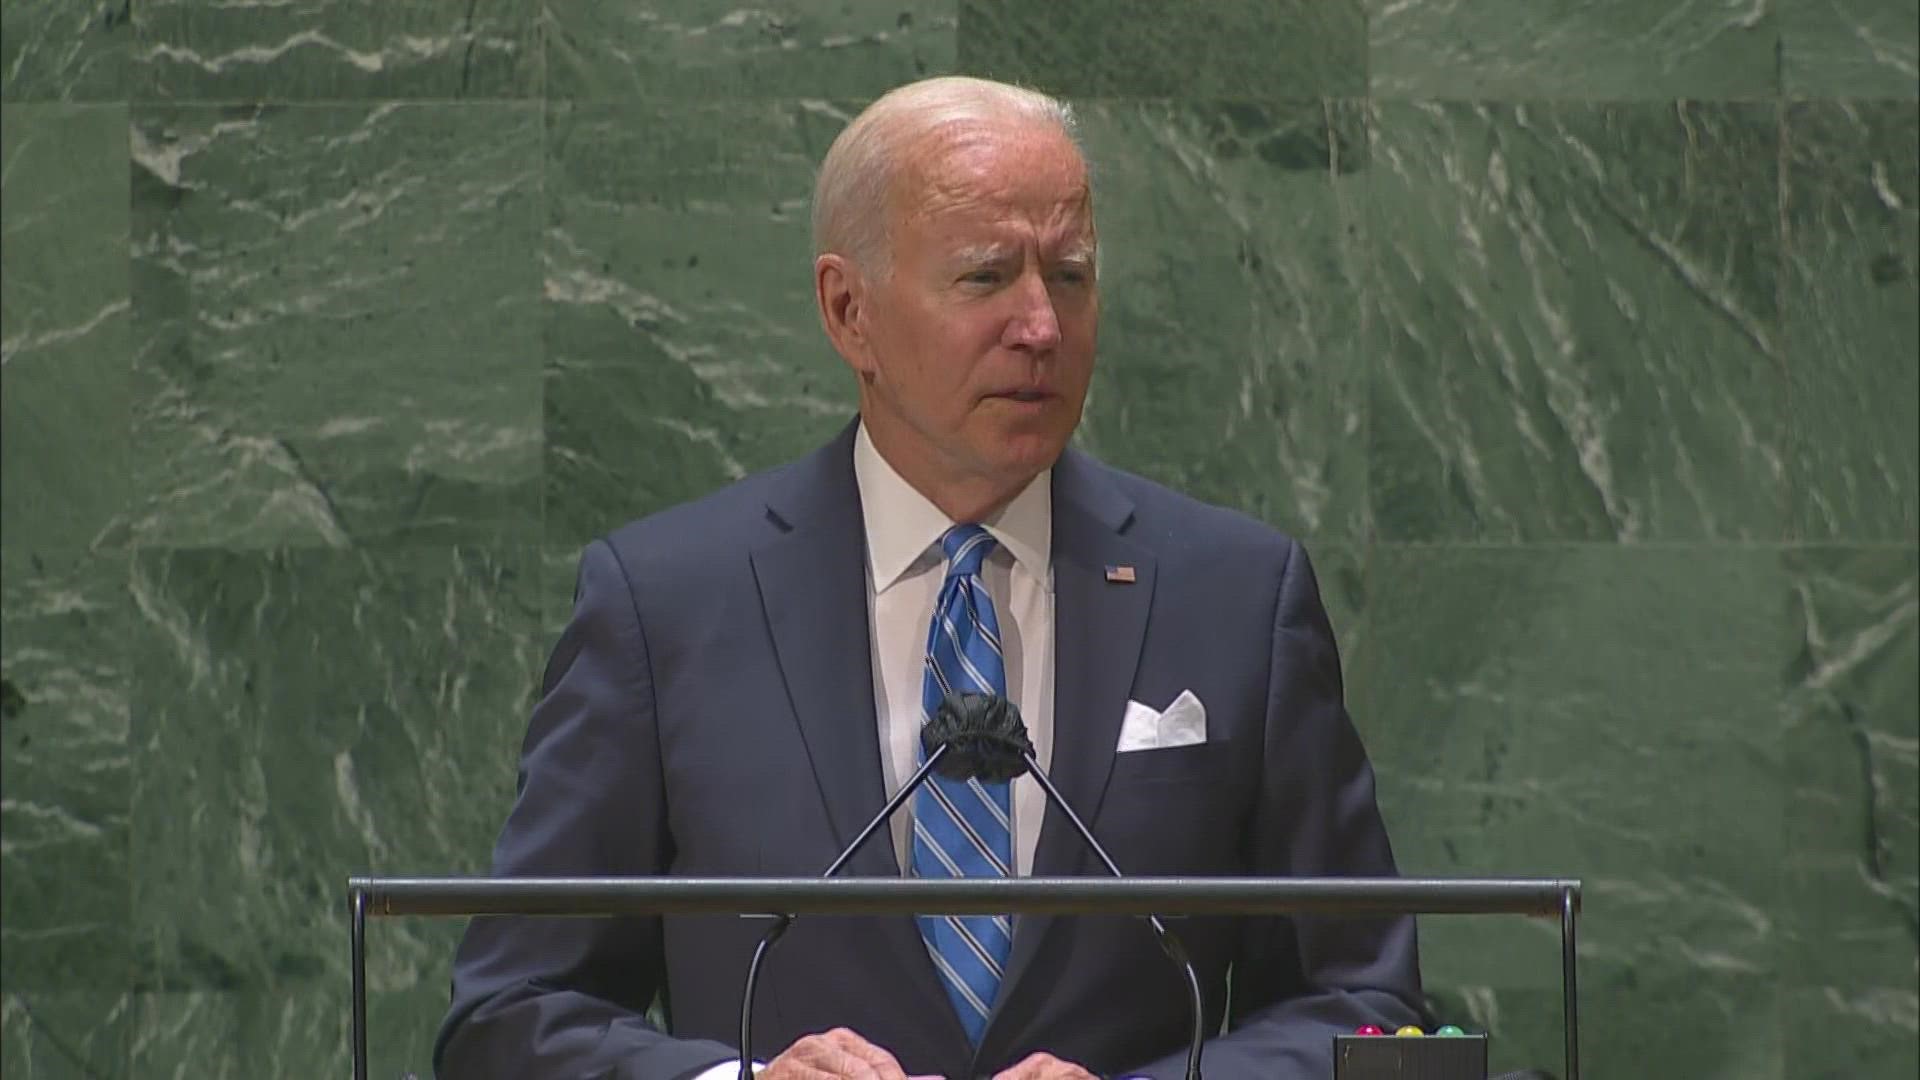 Without mentioning China directly, Biden acknowledged increasing concerns about rising tensions between the two nations.